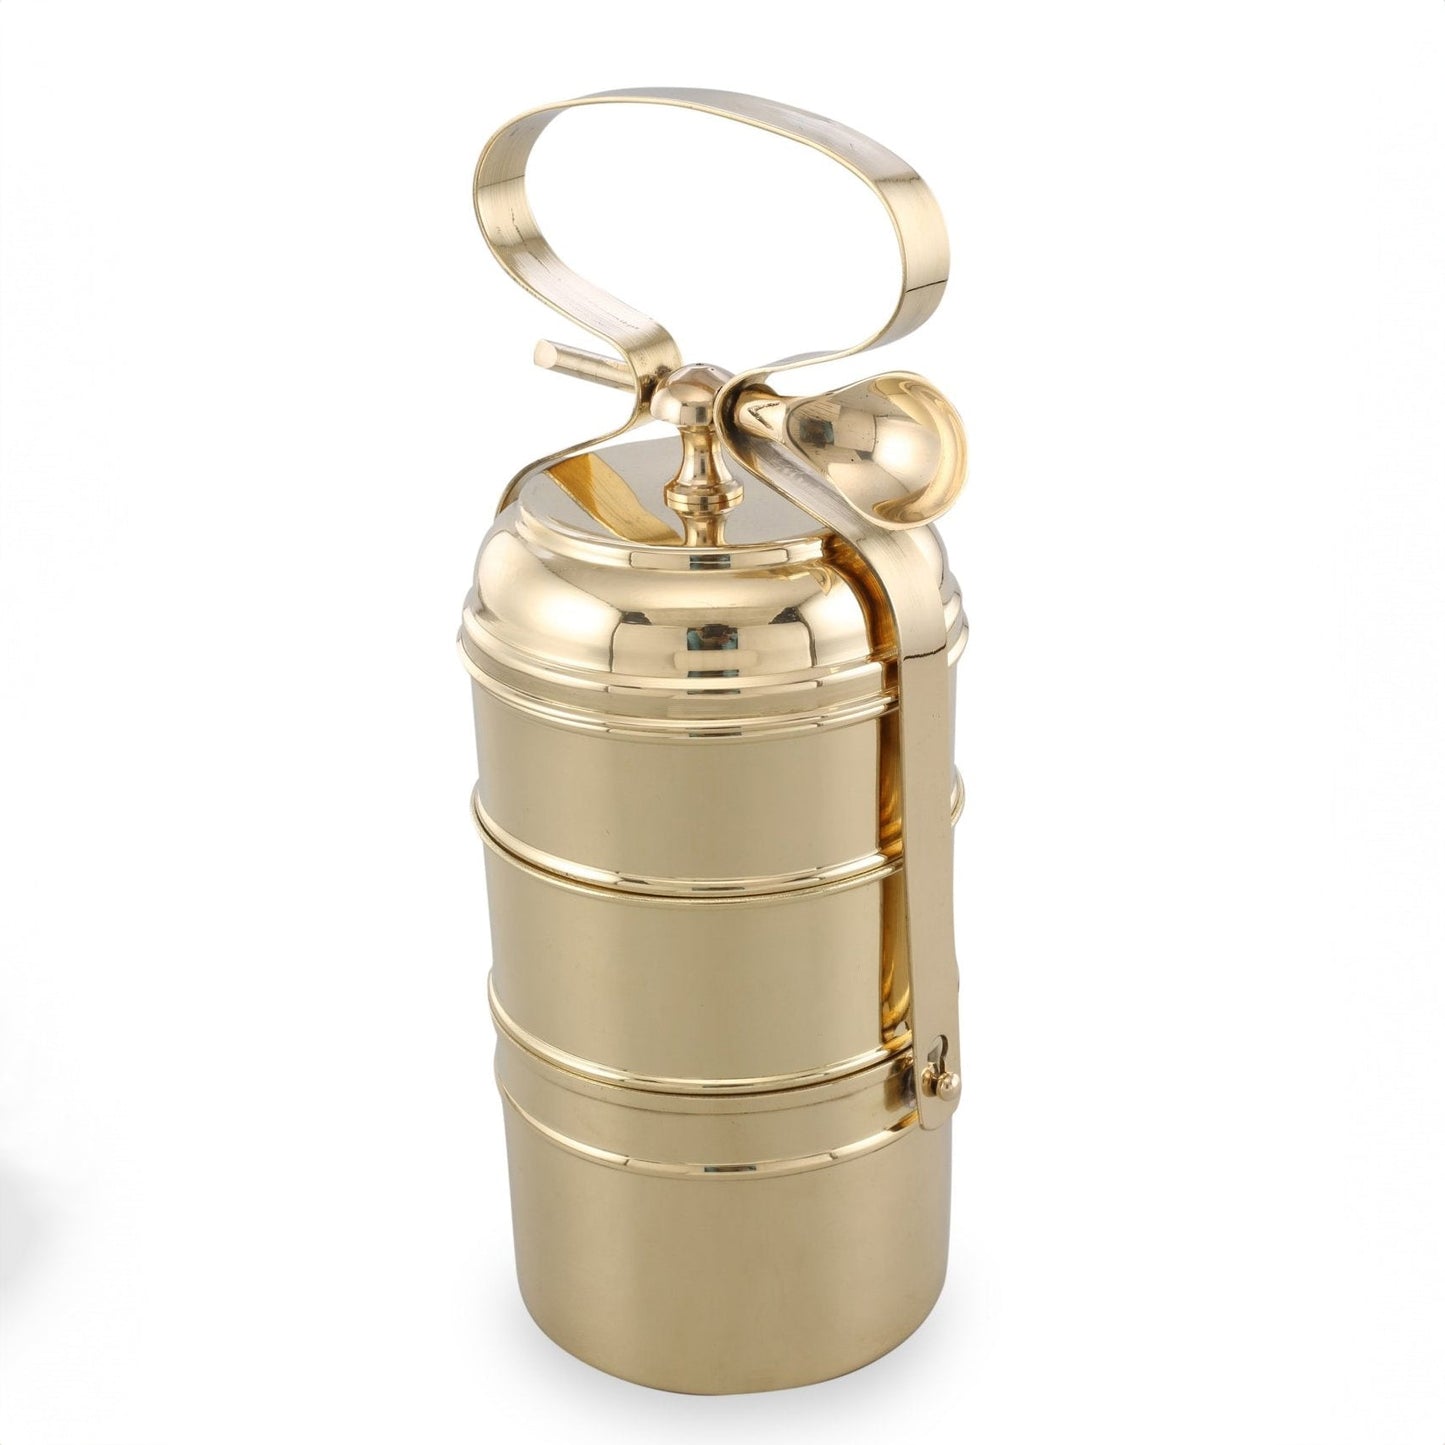 SAMA Homes - brass tiffin with tincoated